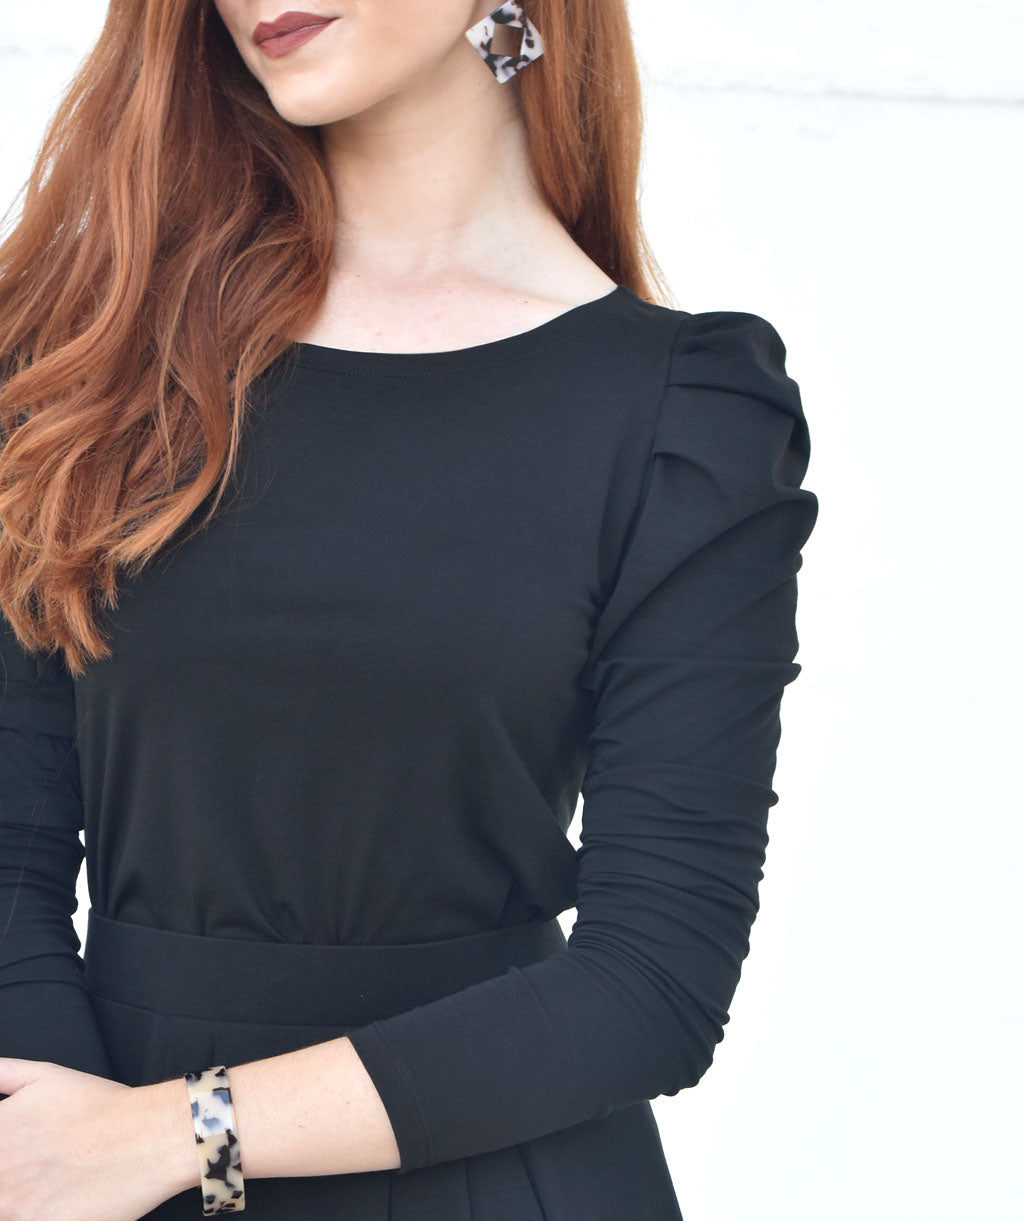 The AUDREY top in Black